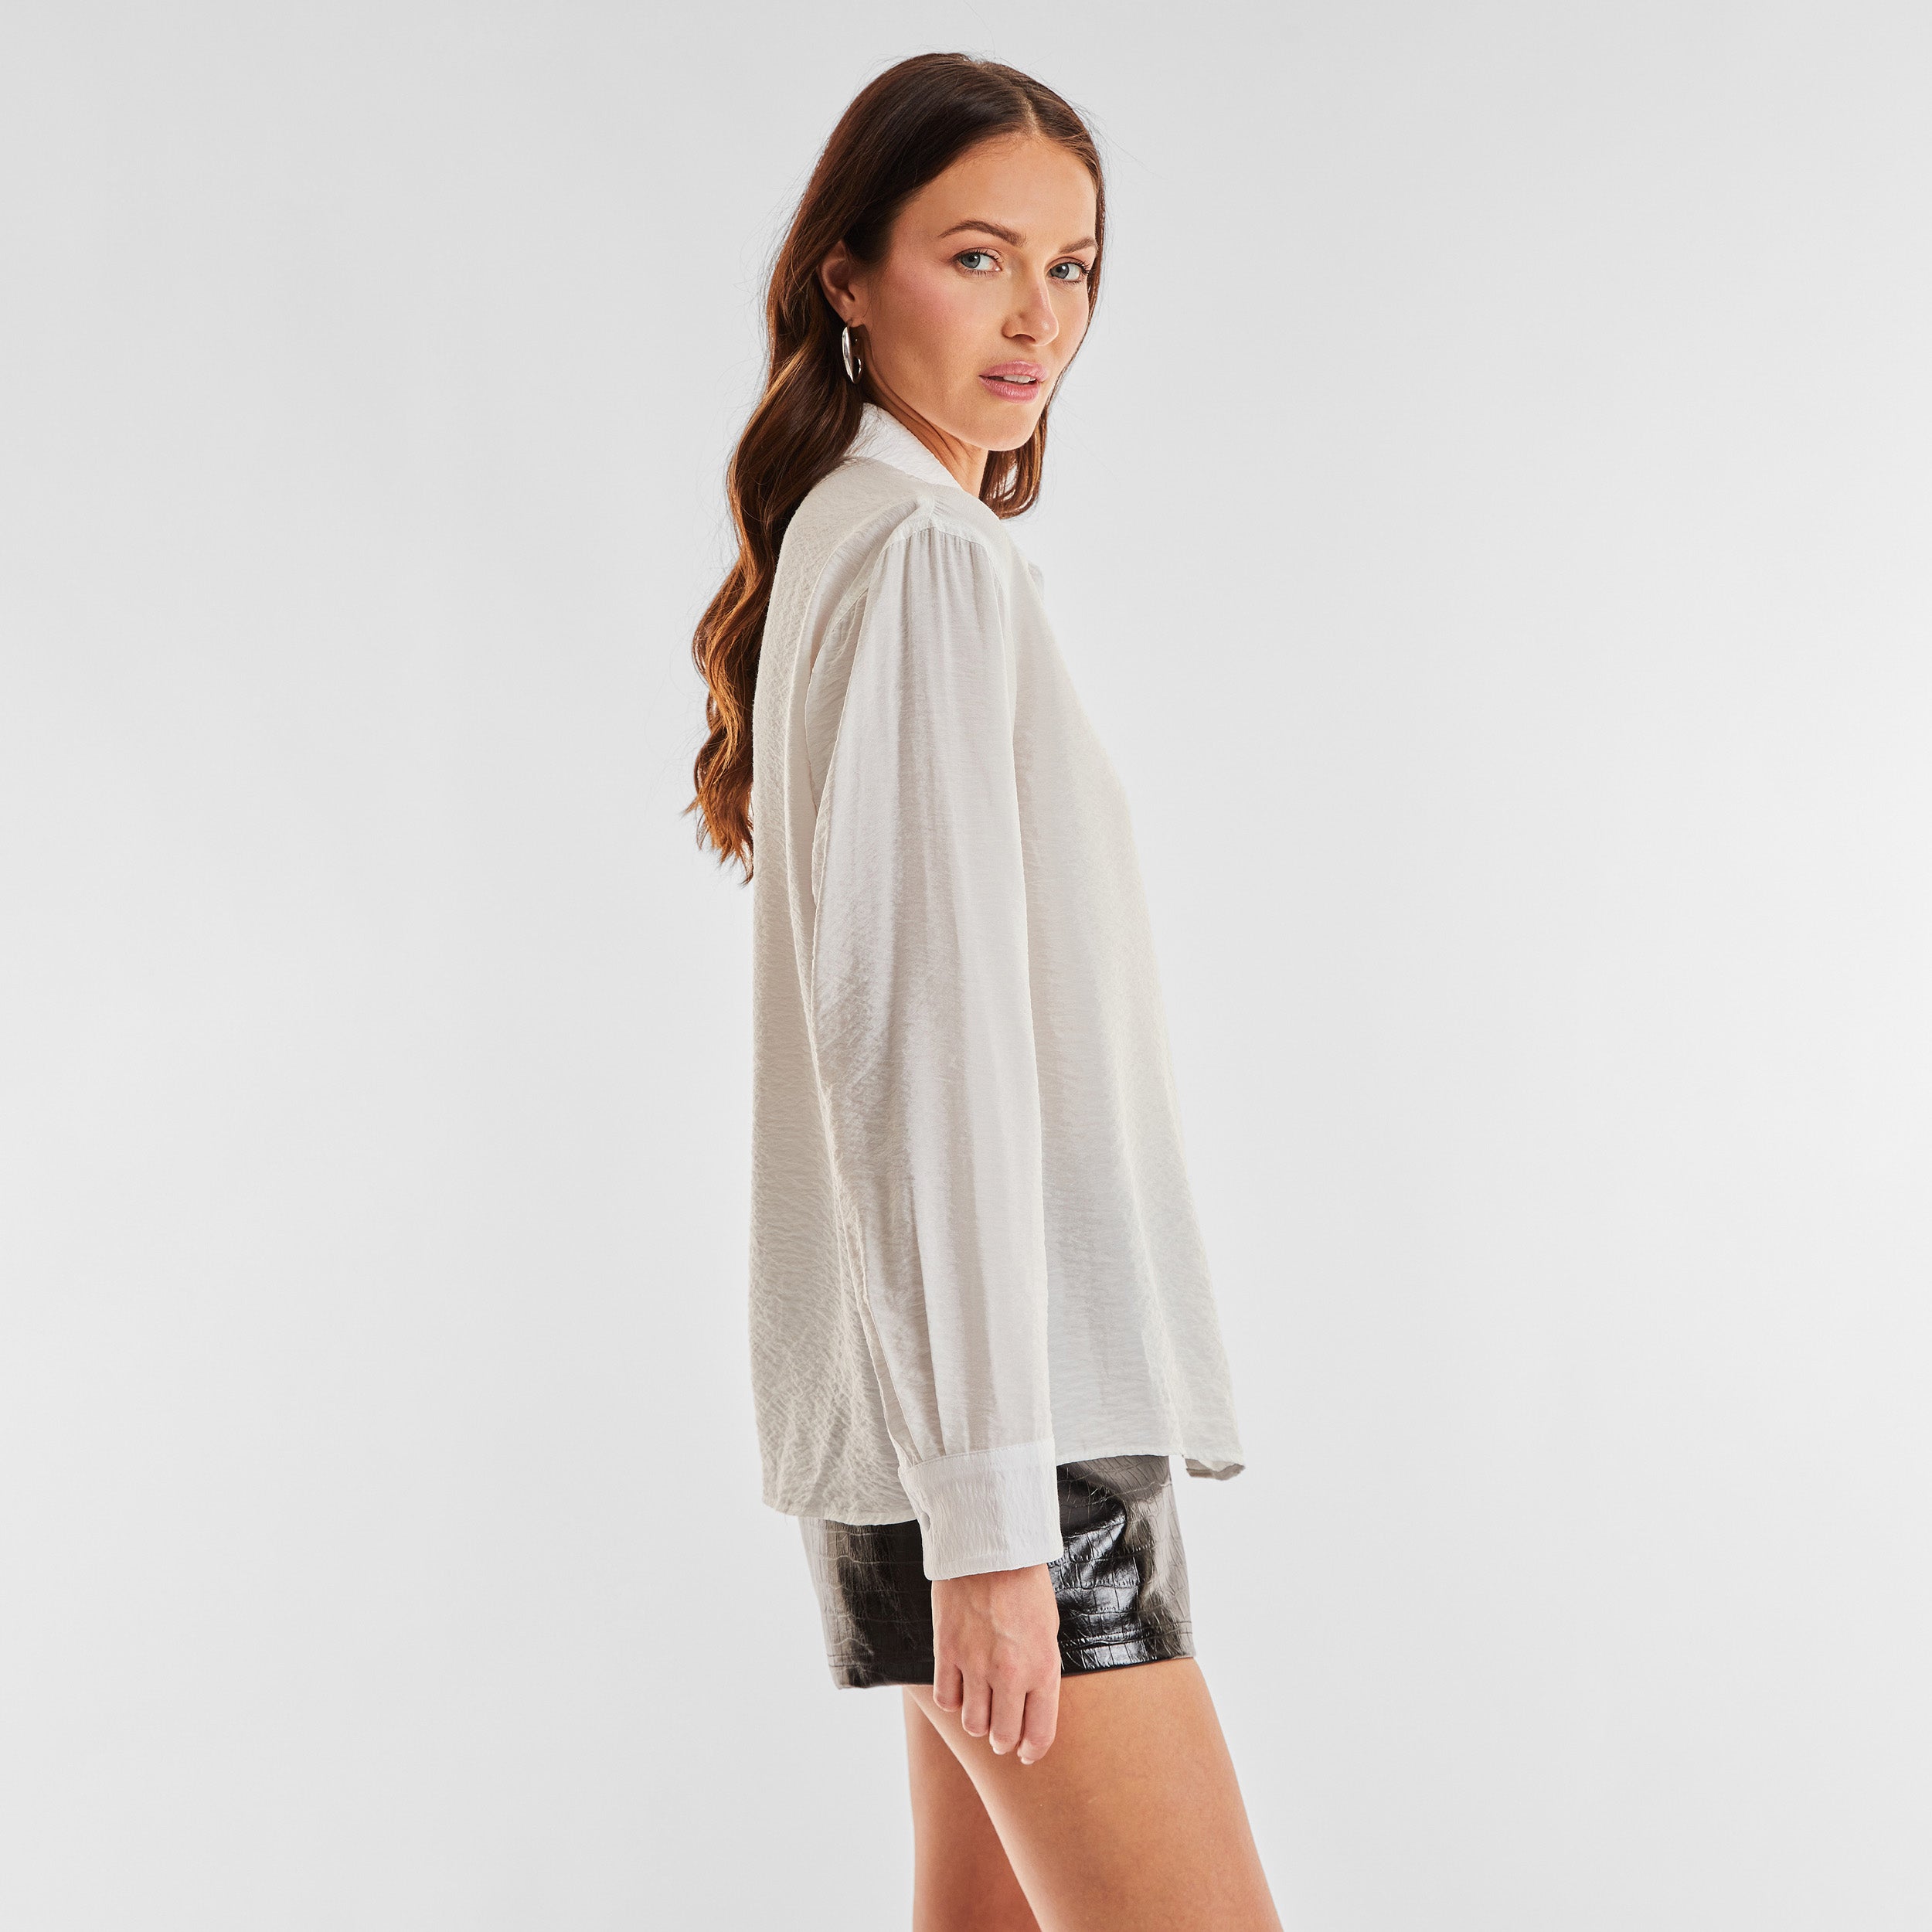 Side view of woman wearing sheer and textured long sleeve button up top.